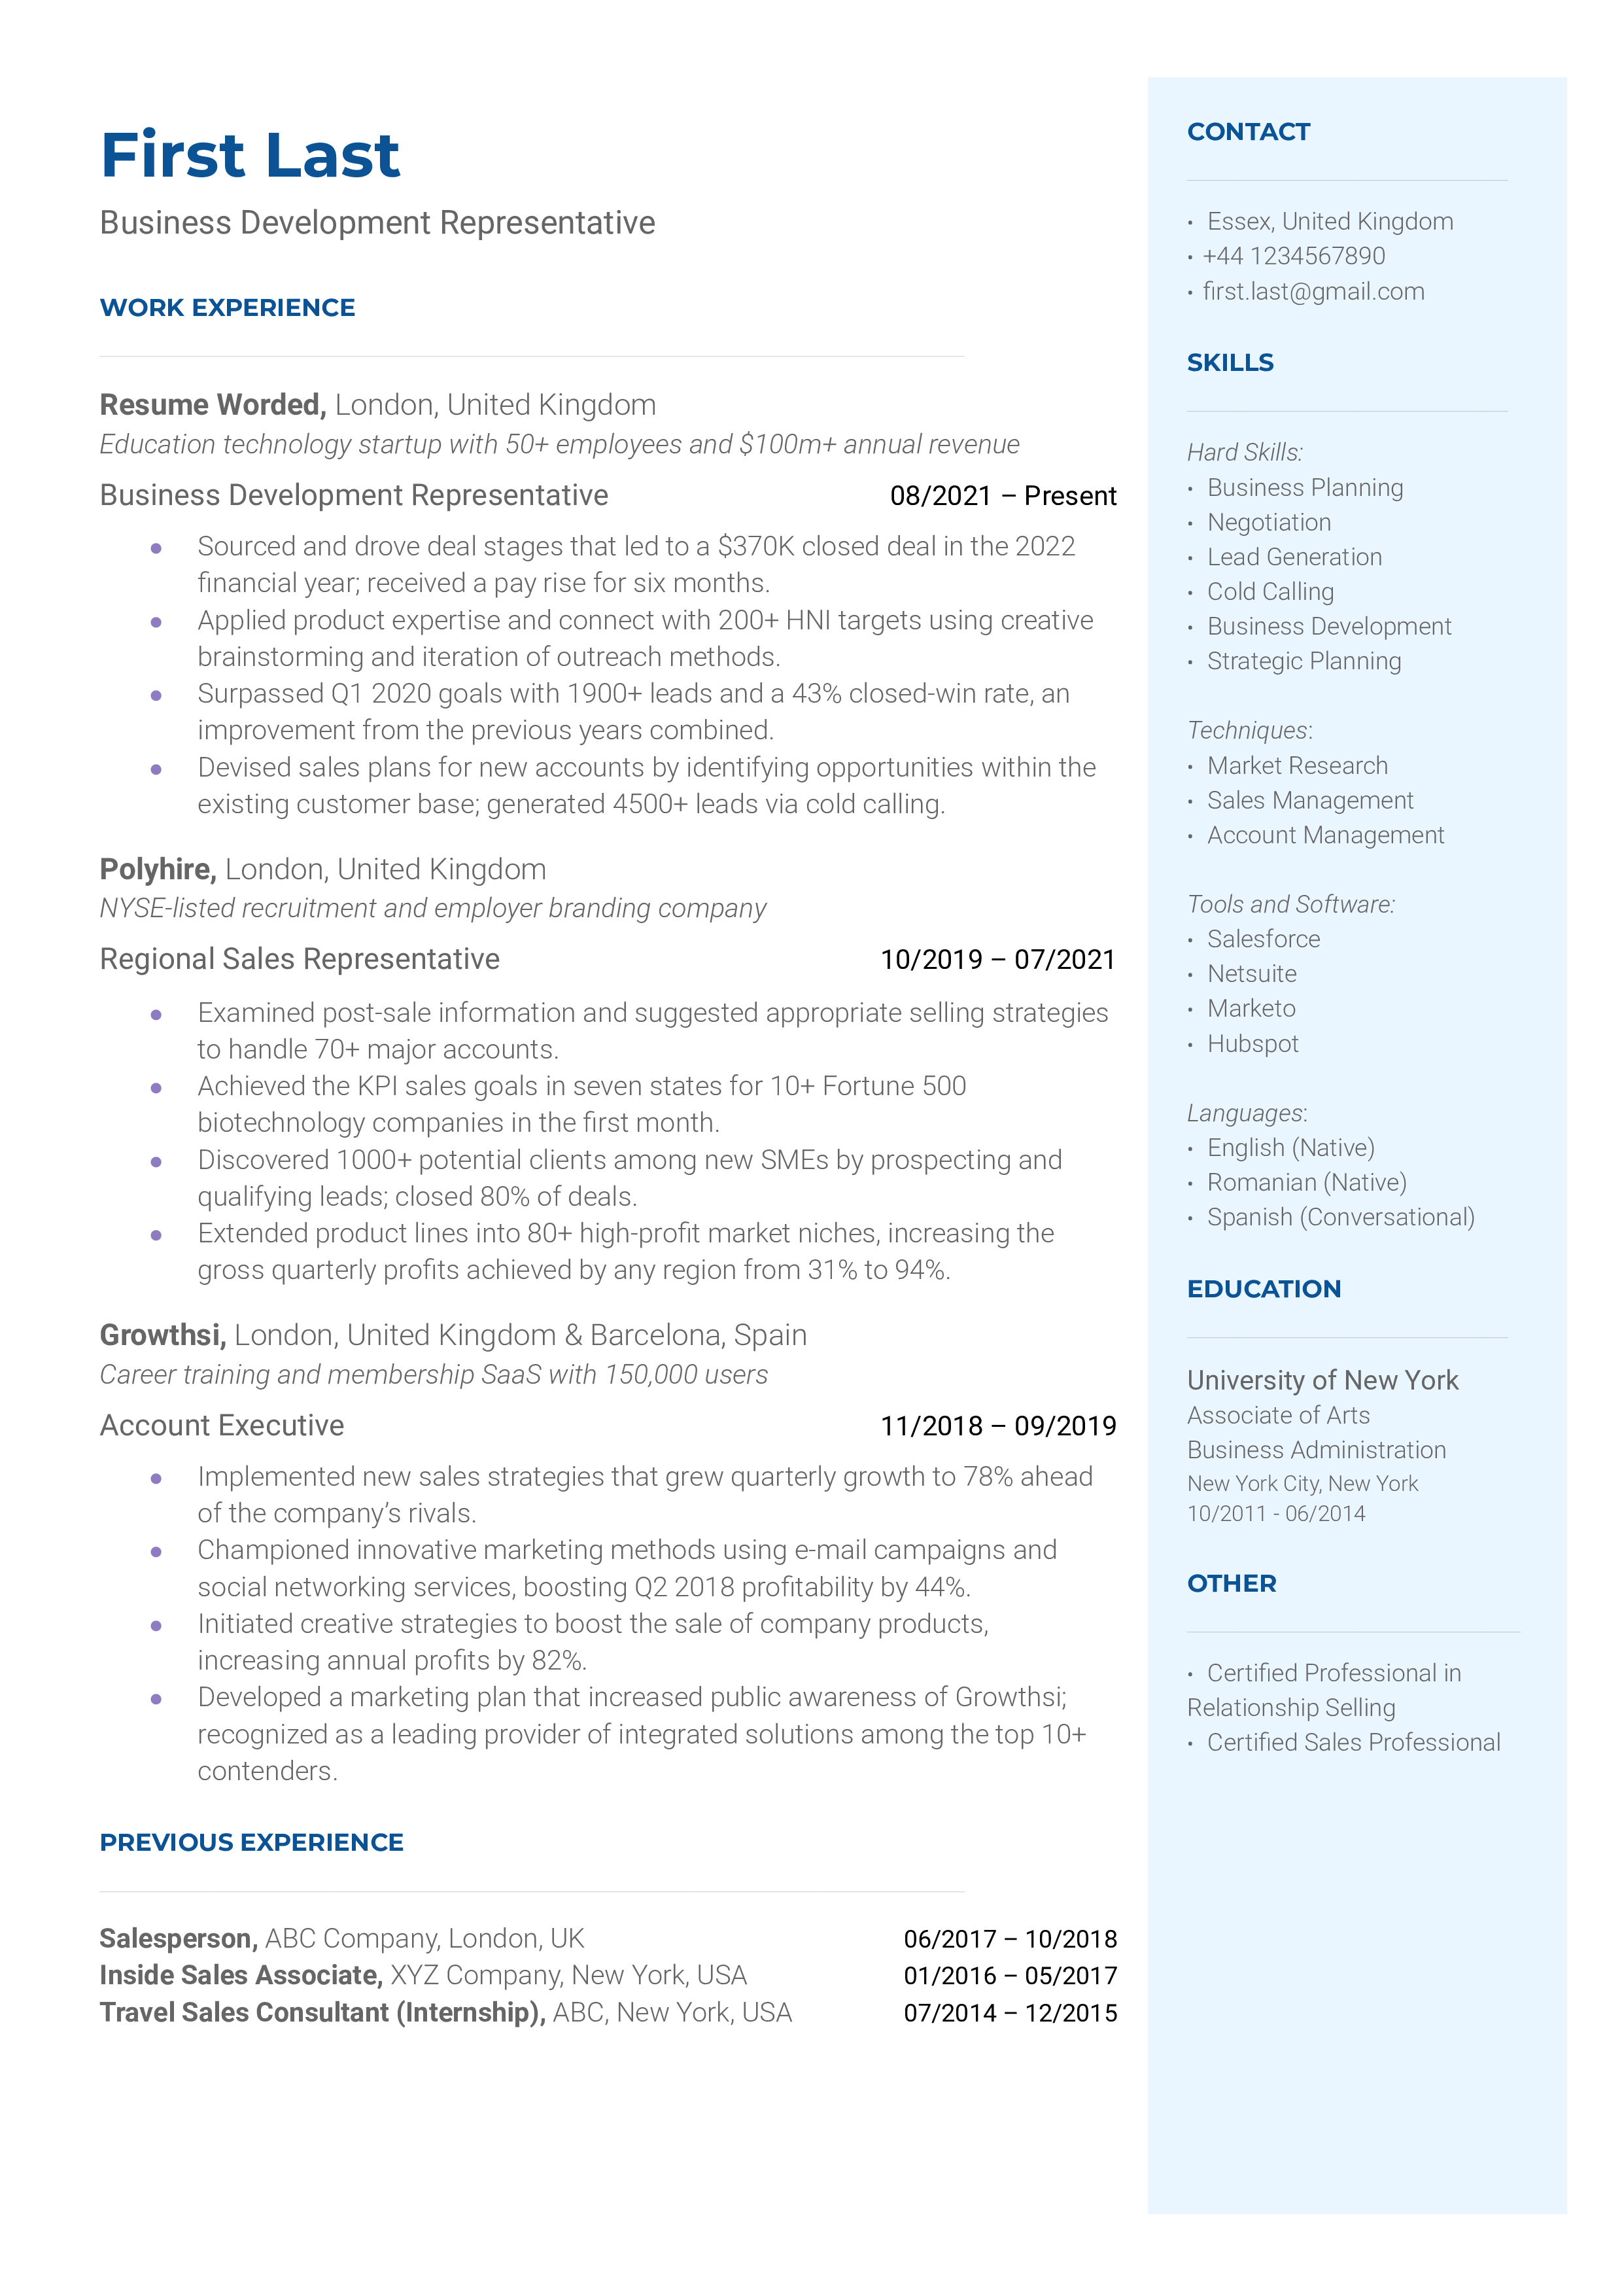 A professional CV layout focused on Business Development Representative skills and experiences.